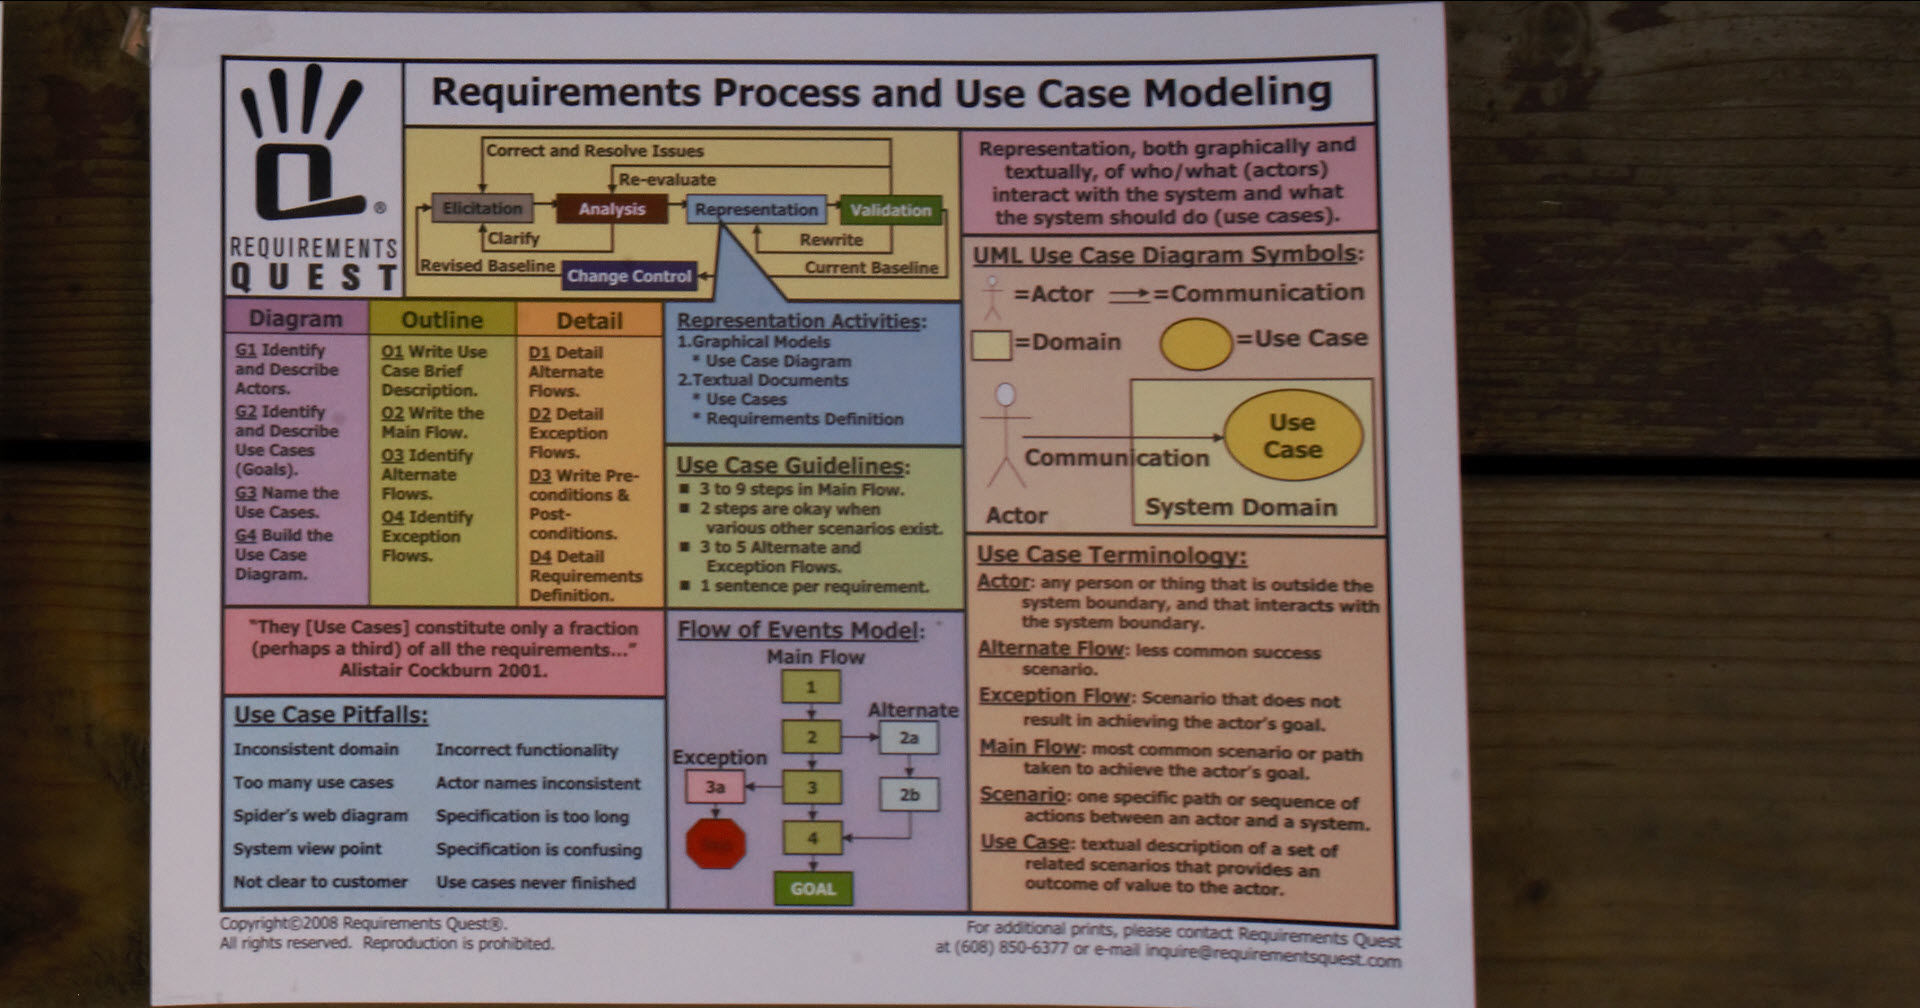 Use Case Modeling Job Aid Reference - Requirements Quest